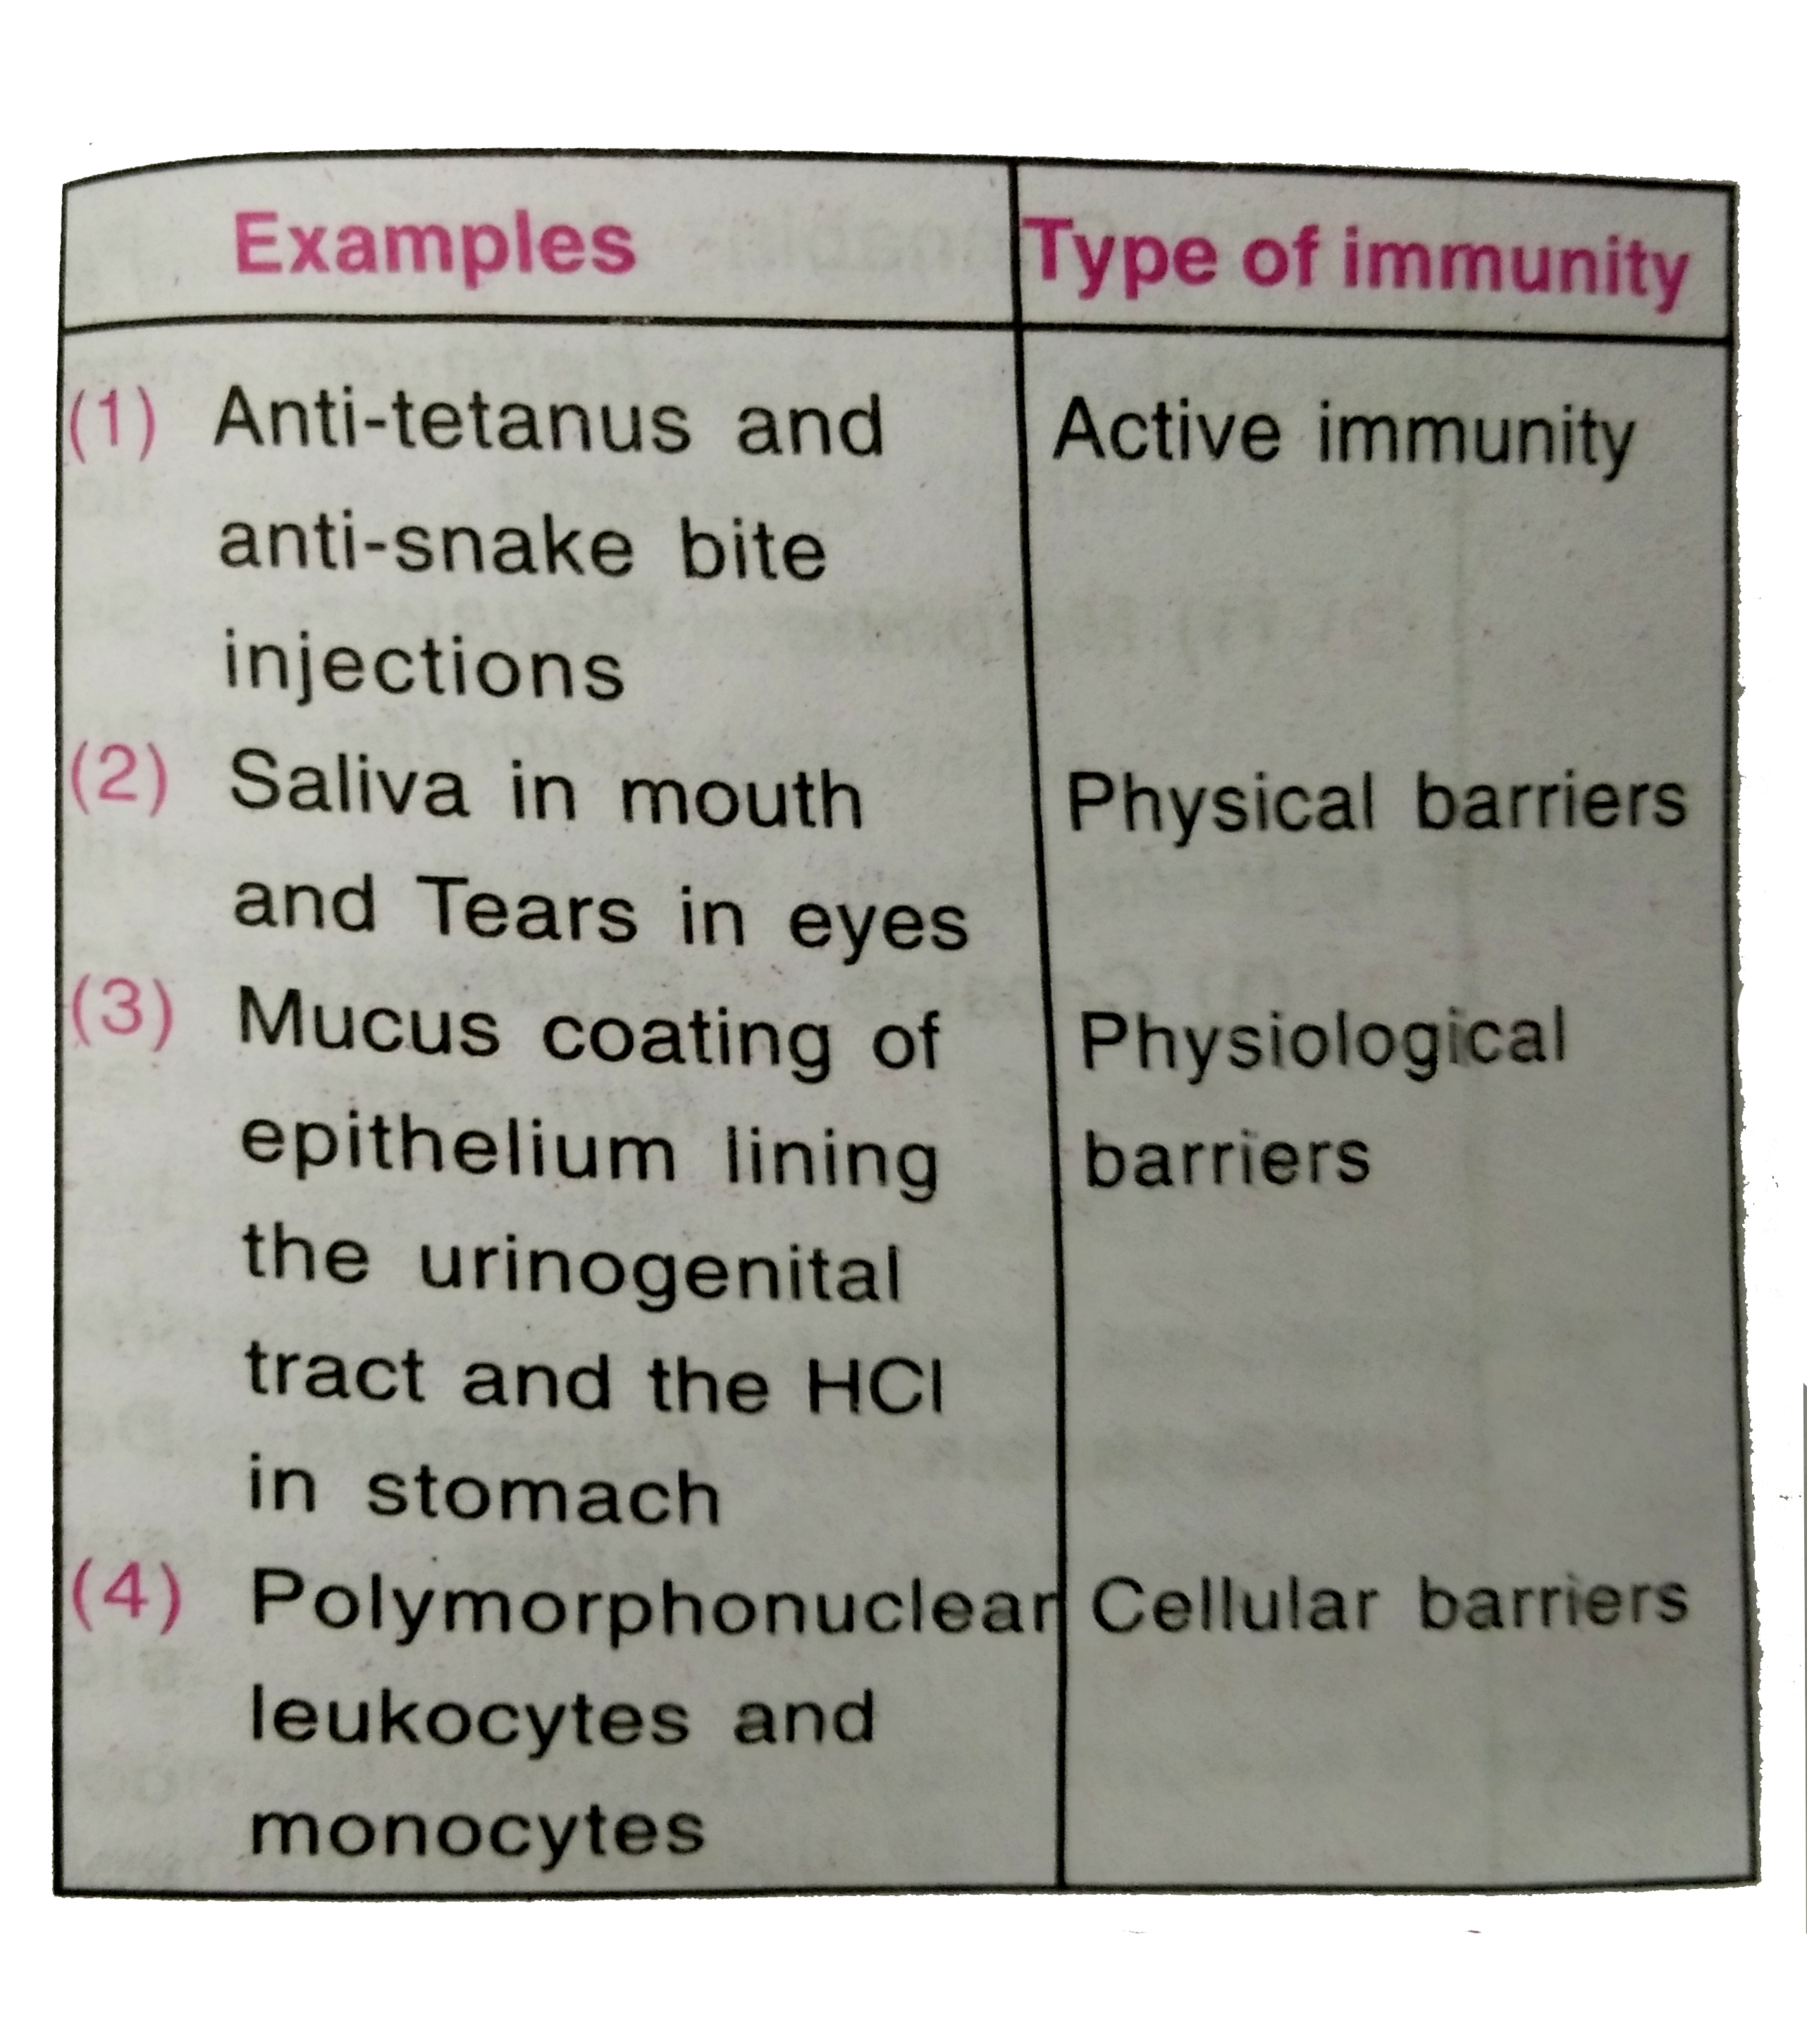 In which one of the following options the two examples are correctly matched with their particular type of immunity?